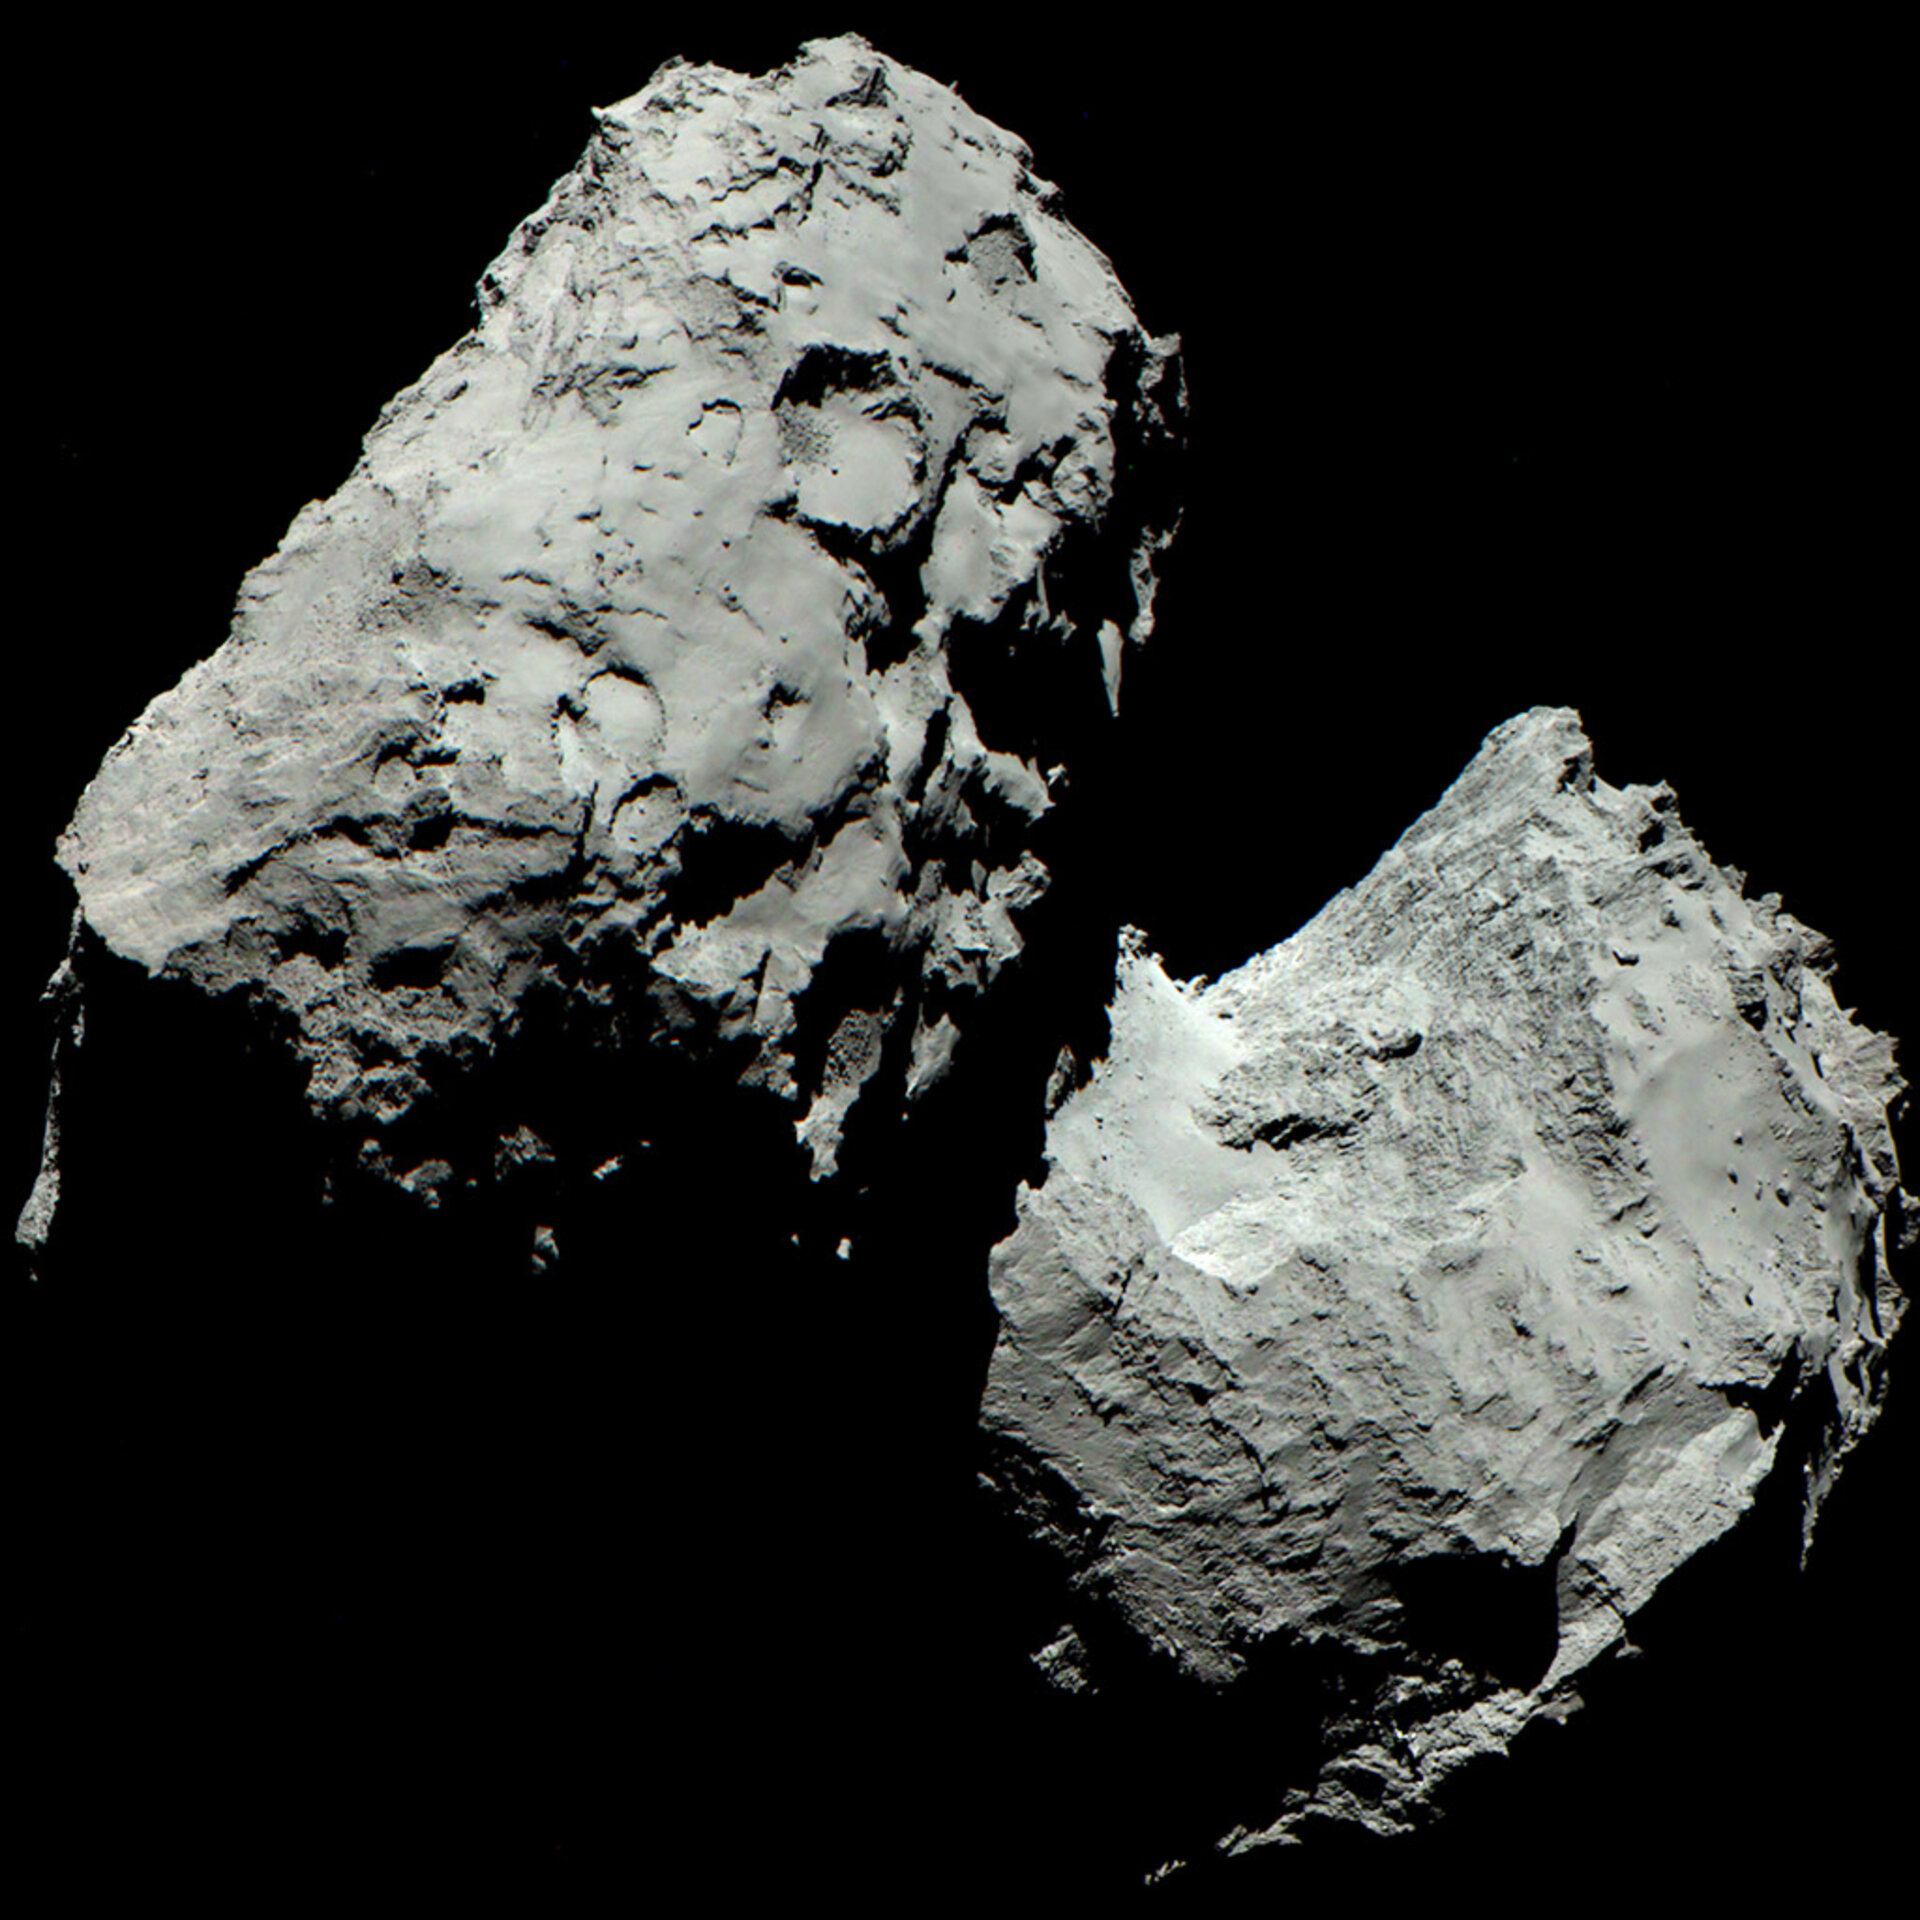 Image of Comet Churyumov-Gerasimenko (67P). Two lobes of this irregularly shaped object are illuminated by sunlight coming from the upper left. Bright streaks of material are seen radiating away from the sunlit surfaces of the comet. These streaks are not seen coming from the shaded portions.